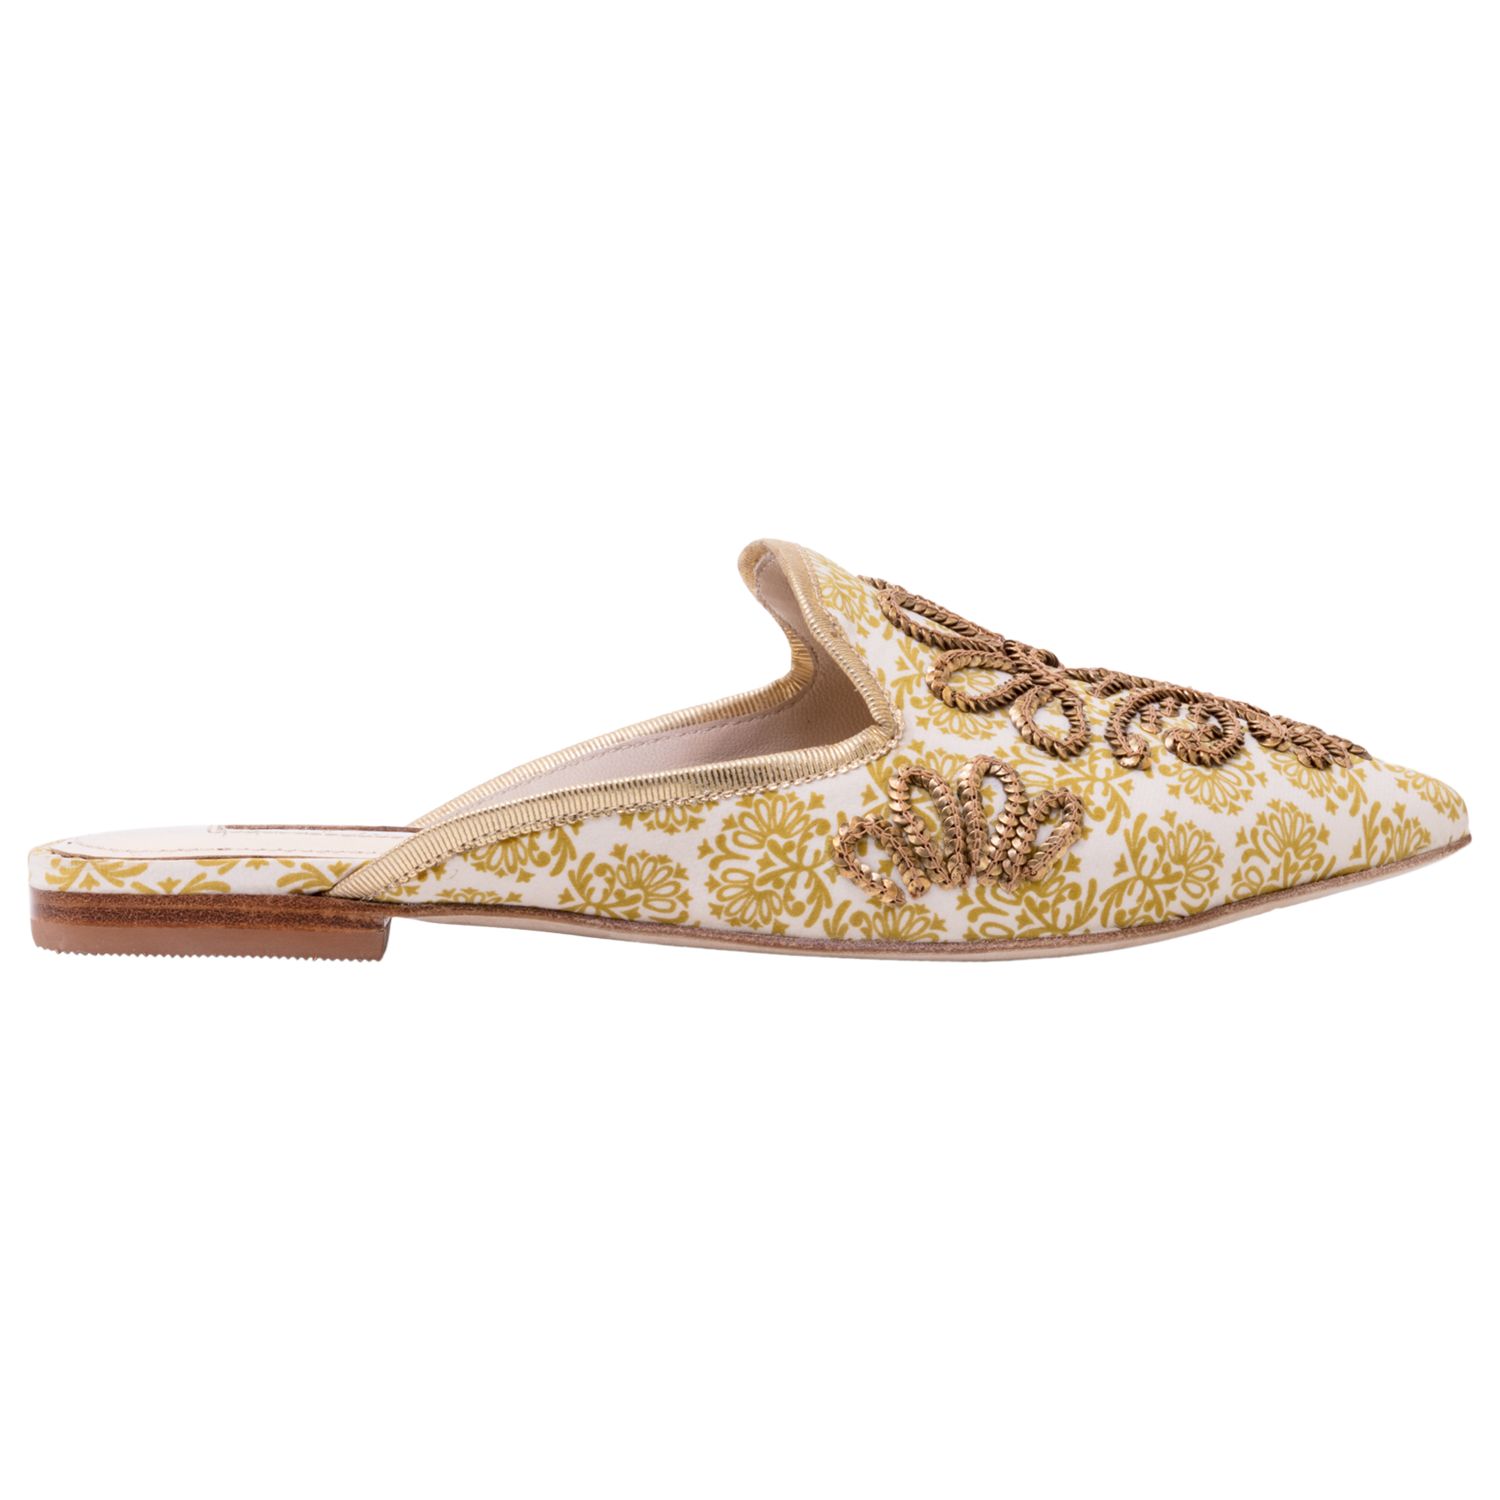 Boden Gilly Flat Sandals, Yellow